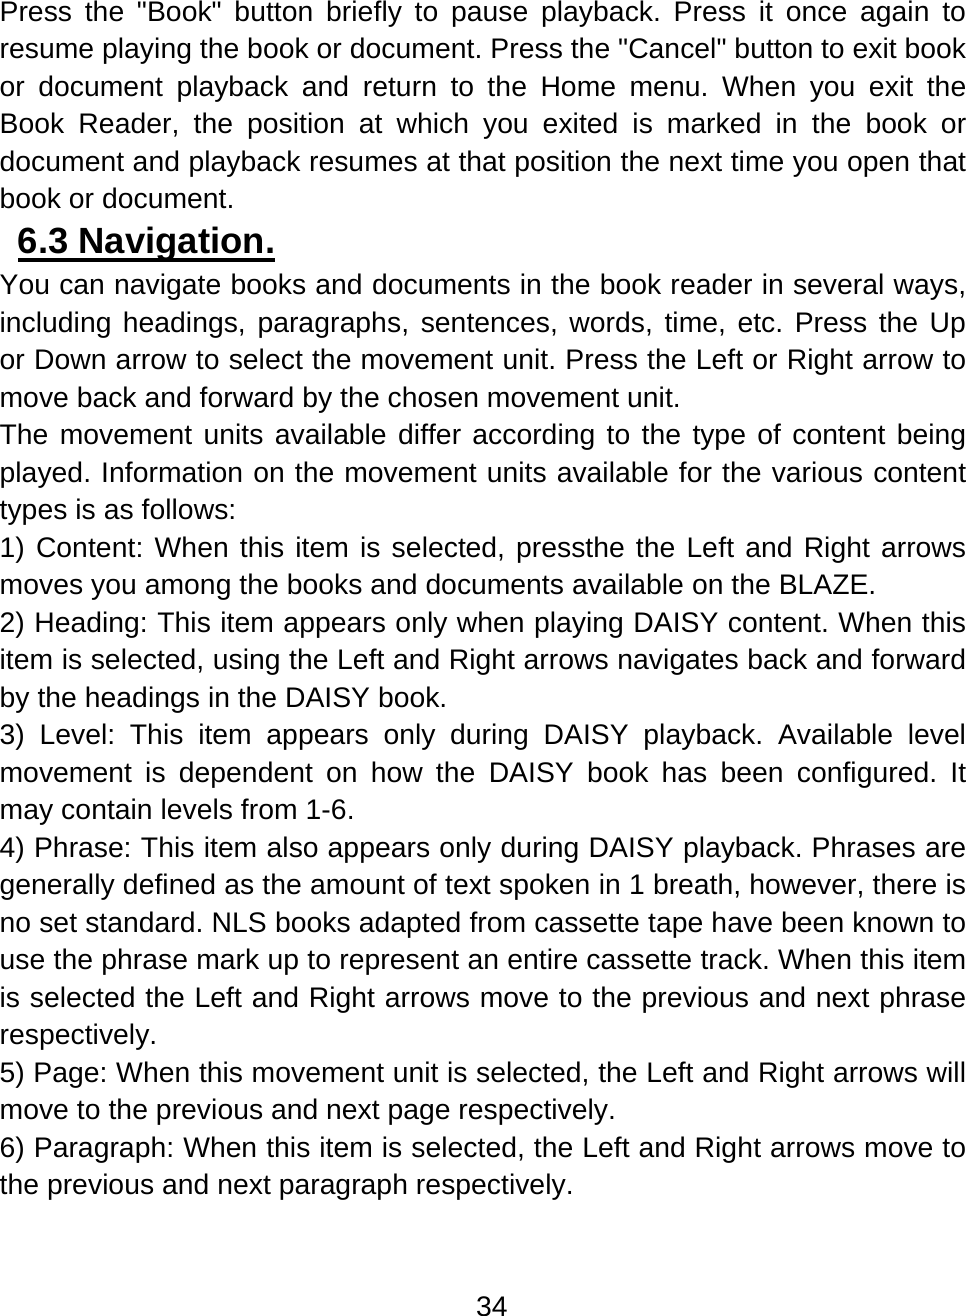 34  Press the &quot;Book&quot; button briefly to pause playback. Press it once again to resume playing the book or document. Press the &quot;Cancel&quot; button to exit book or document playback and return to the Home menu. When you exit the Book Reader, the position at which you exited is marked in the book or document and playback resumes at that position the next time you open that book or document. 6.3 Navigation.  You can navigate books and documents in the book reader in several ways, including headings, paragraphs, sentences, words, time, etc. Press the Up or Down arrow to select the movement unit. Press the Left or Right arrow to move back and forward by the chosen movement unit.  The movement units available differ according to the type of content being played. Information on the movement units available for the various content types is as follows: 1) Content: When this item is selected, pressthe the Left and Right arrows moves you among the books and documents available on the BLAZE. 2) Heading: This item appears only when playing DAISY content. When this item is selected, using the Left and Right arrows navigates back and forward by the headings in the DAISY book. 3) Level: This item appears only during DAISY playback. Available level movement is dependent on how the DAISY book has been configured. It may contain levels from 1-6. 4) Phrase: This item also appears only during DAISY playback. Phrases are generally defined as the amount of text spoken in 1 breath, however, there is no set standard. NLS books adapted from cassette tape have been known to use the phrase mark up to represent an entire cassette track. When this item is selected the Left and Right arrows move to the previous and next phrase respectively. 5) Page: When this movement unit is selected, the Left and Right arrows will move to the previous and next page respectively. 6) Paragraph: When this item is selected, the Left and Right arrows move to the previous and next paragraph respectively. 